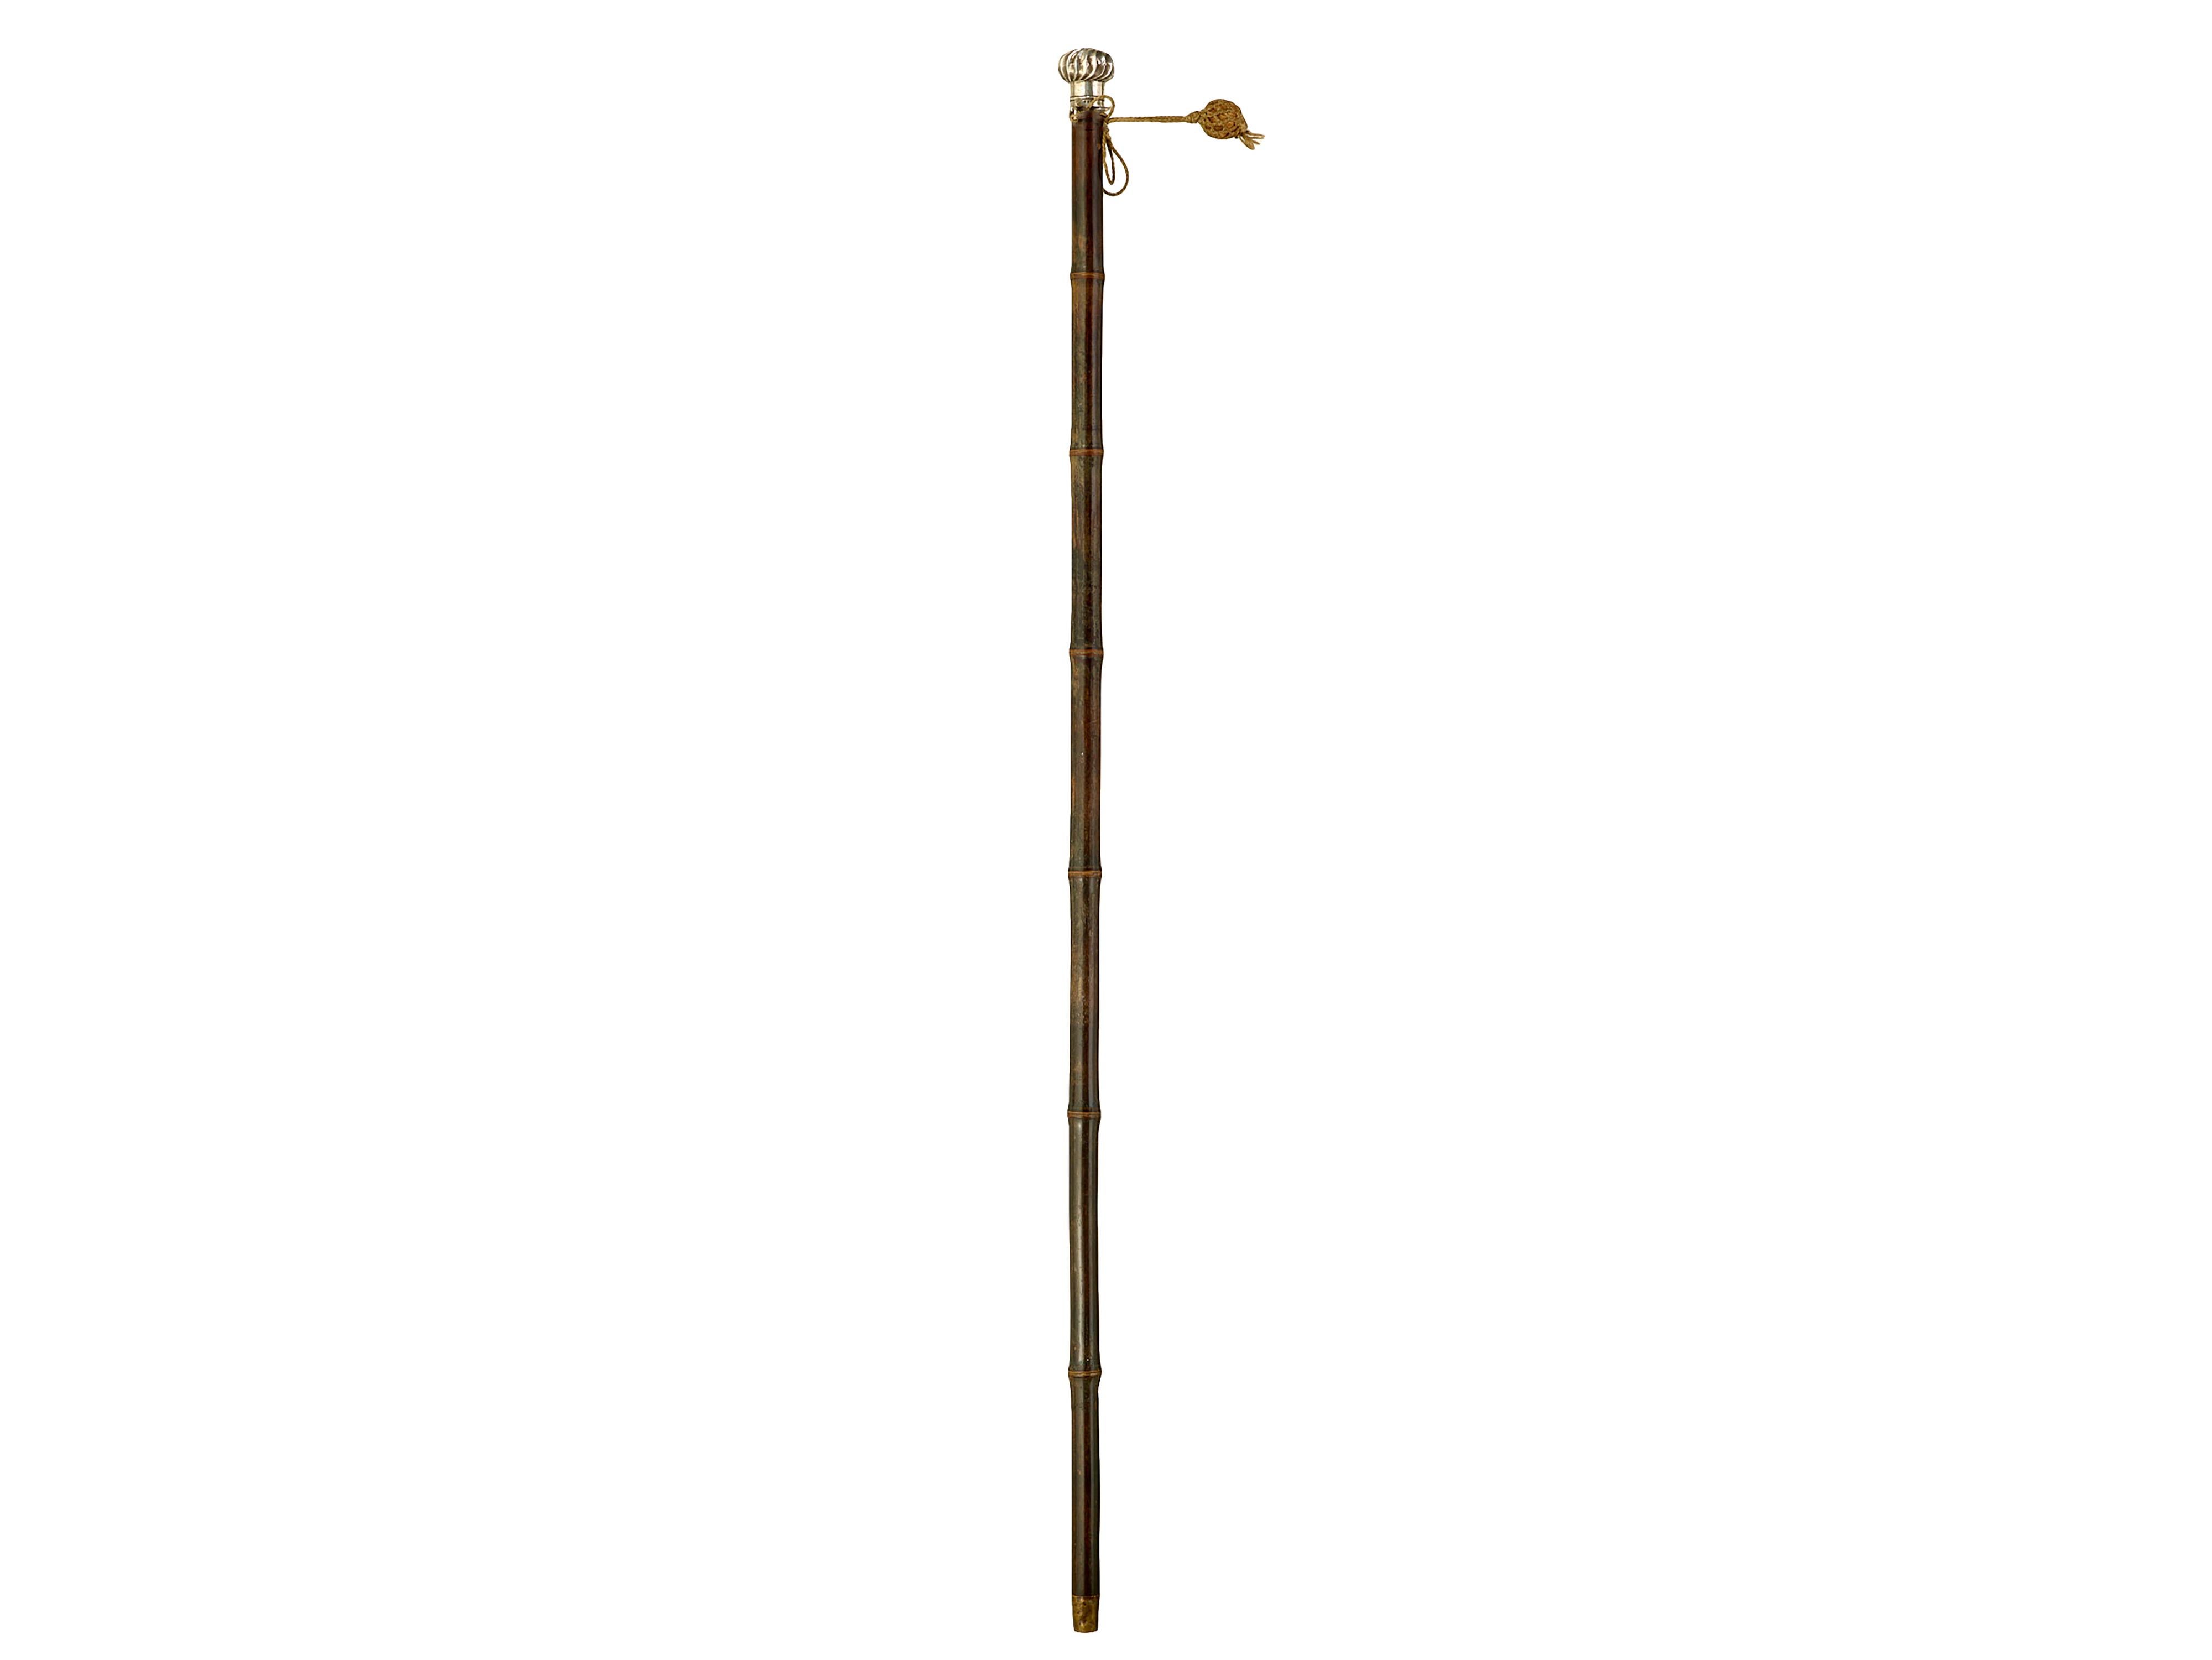 Late 19th Century Briggs Patent walking cane with pencil For Sale